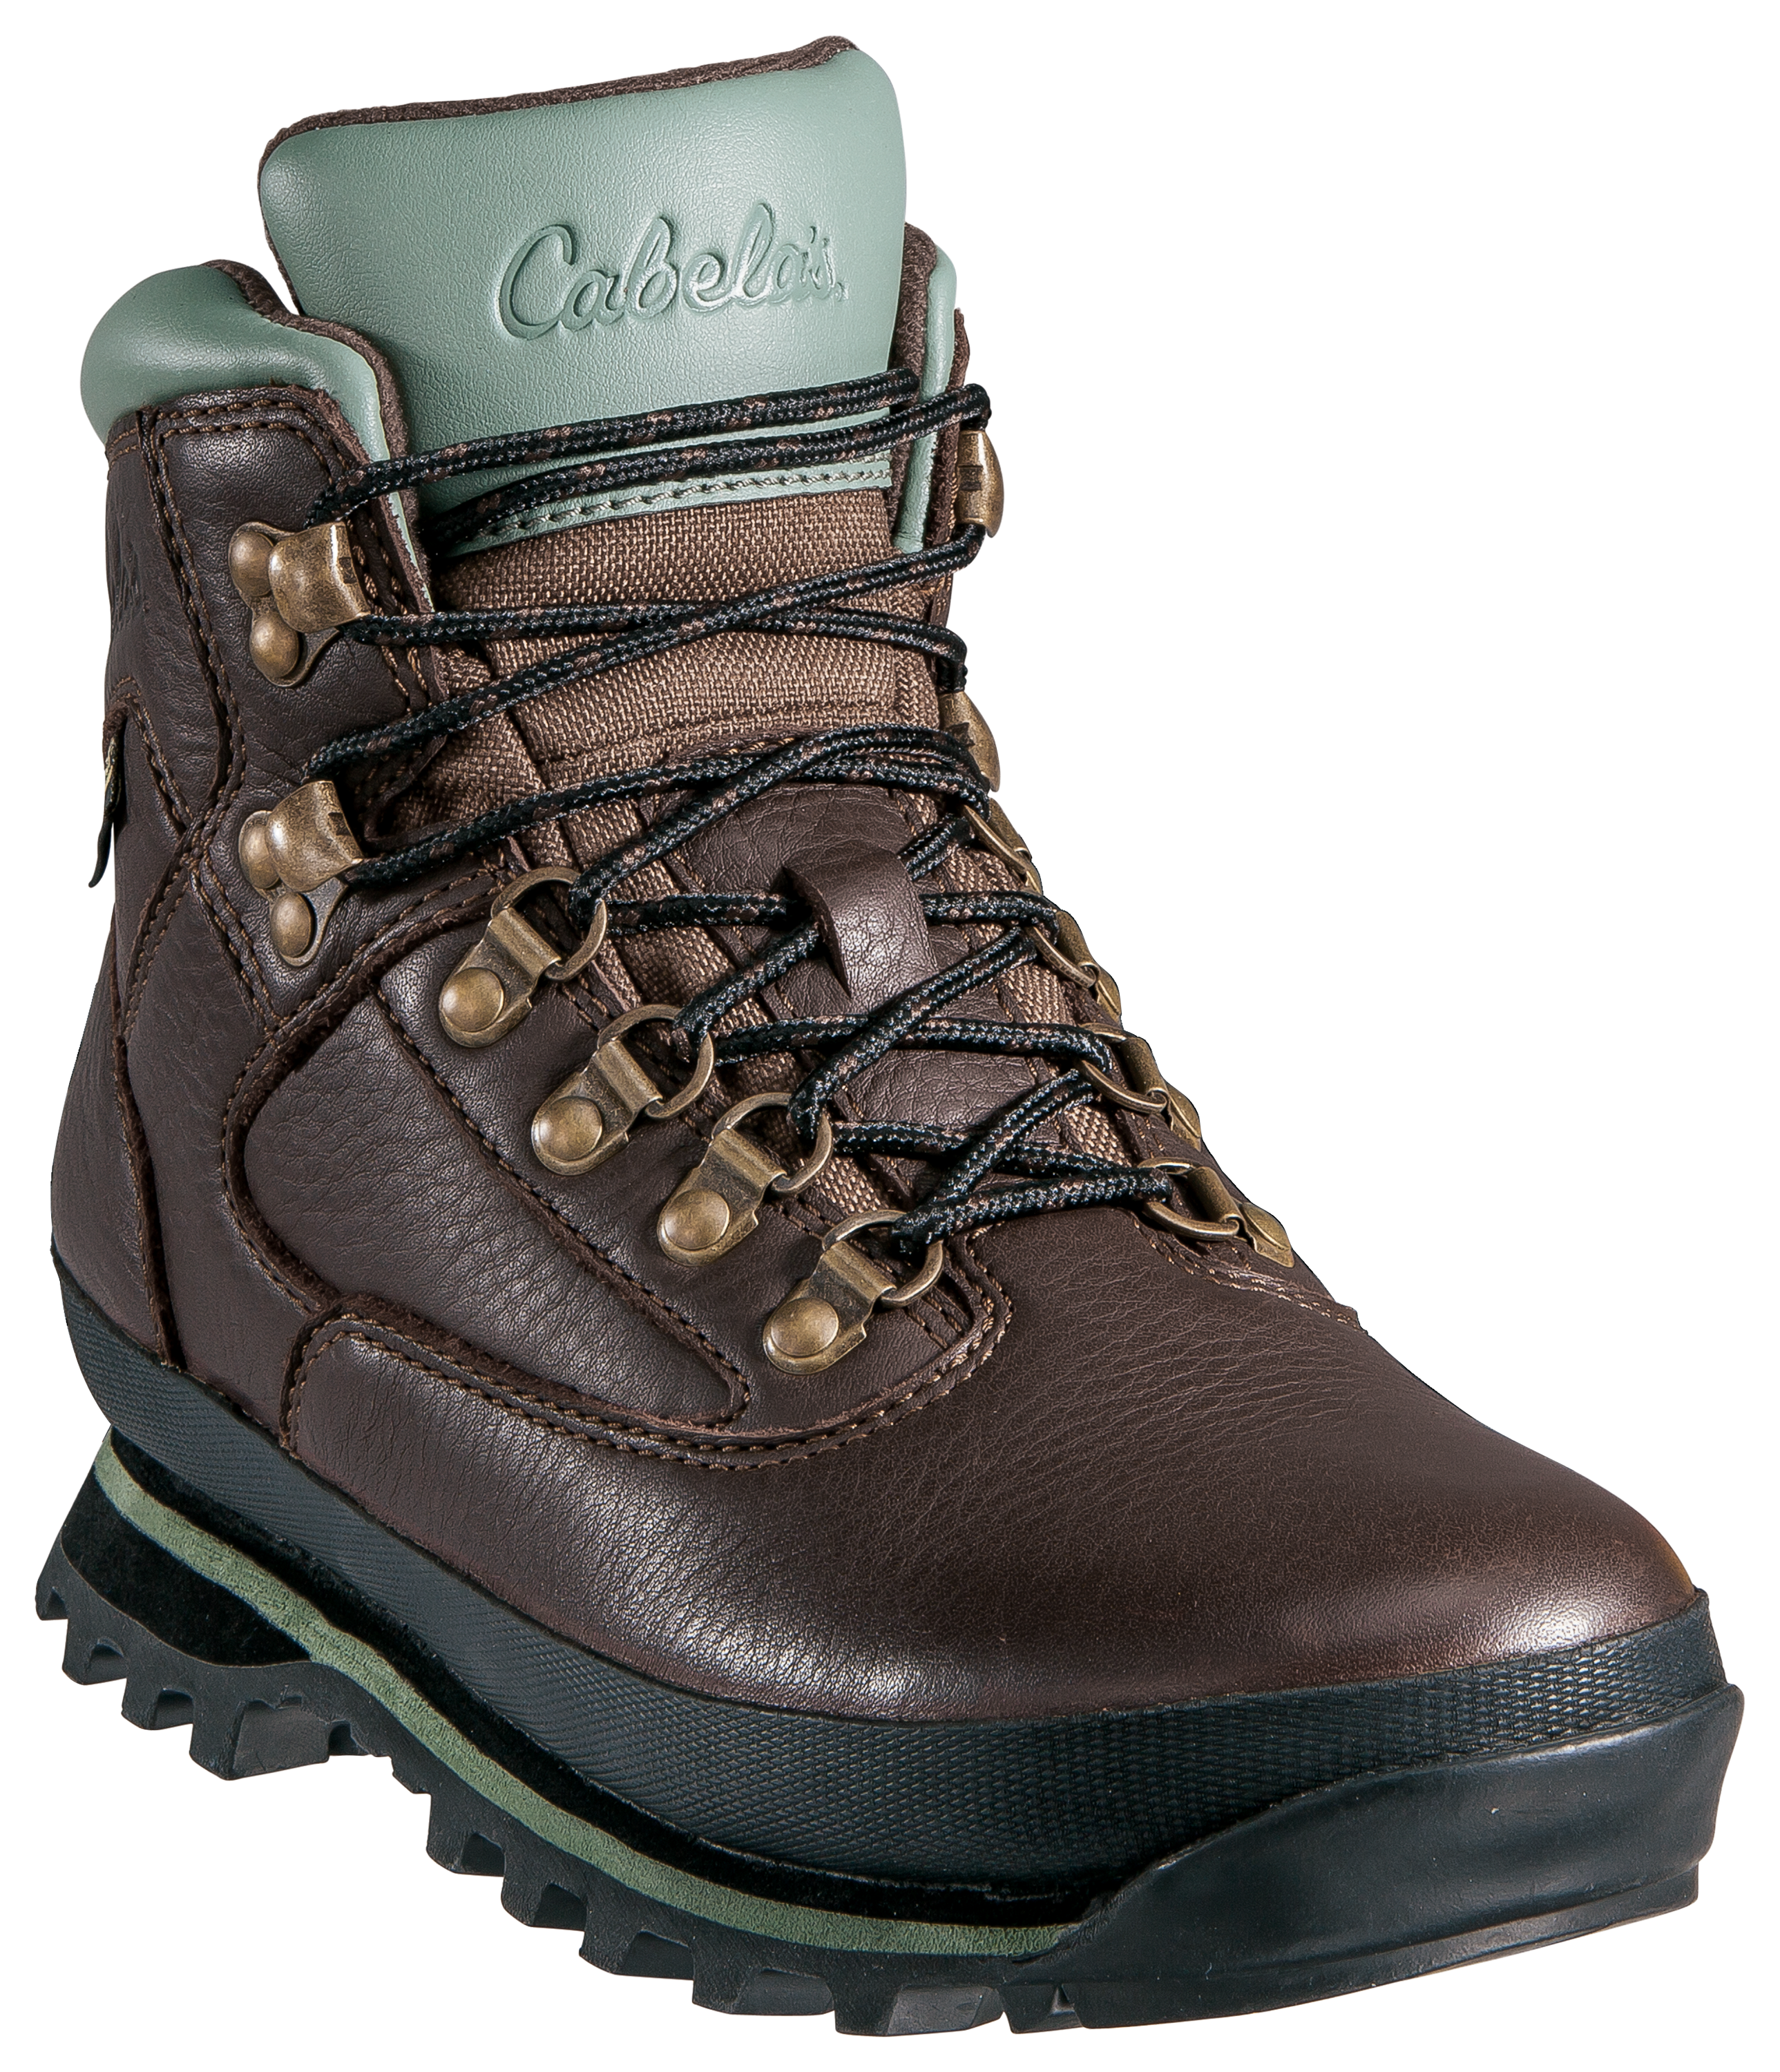 Cabela's Rimrock Mid GORE-TEX Hiking Boots for Ladies - Brown - 9.5 M